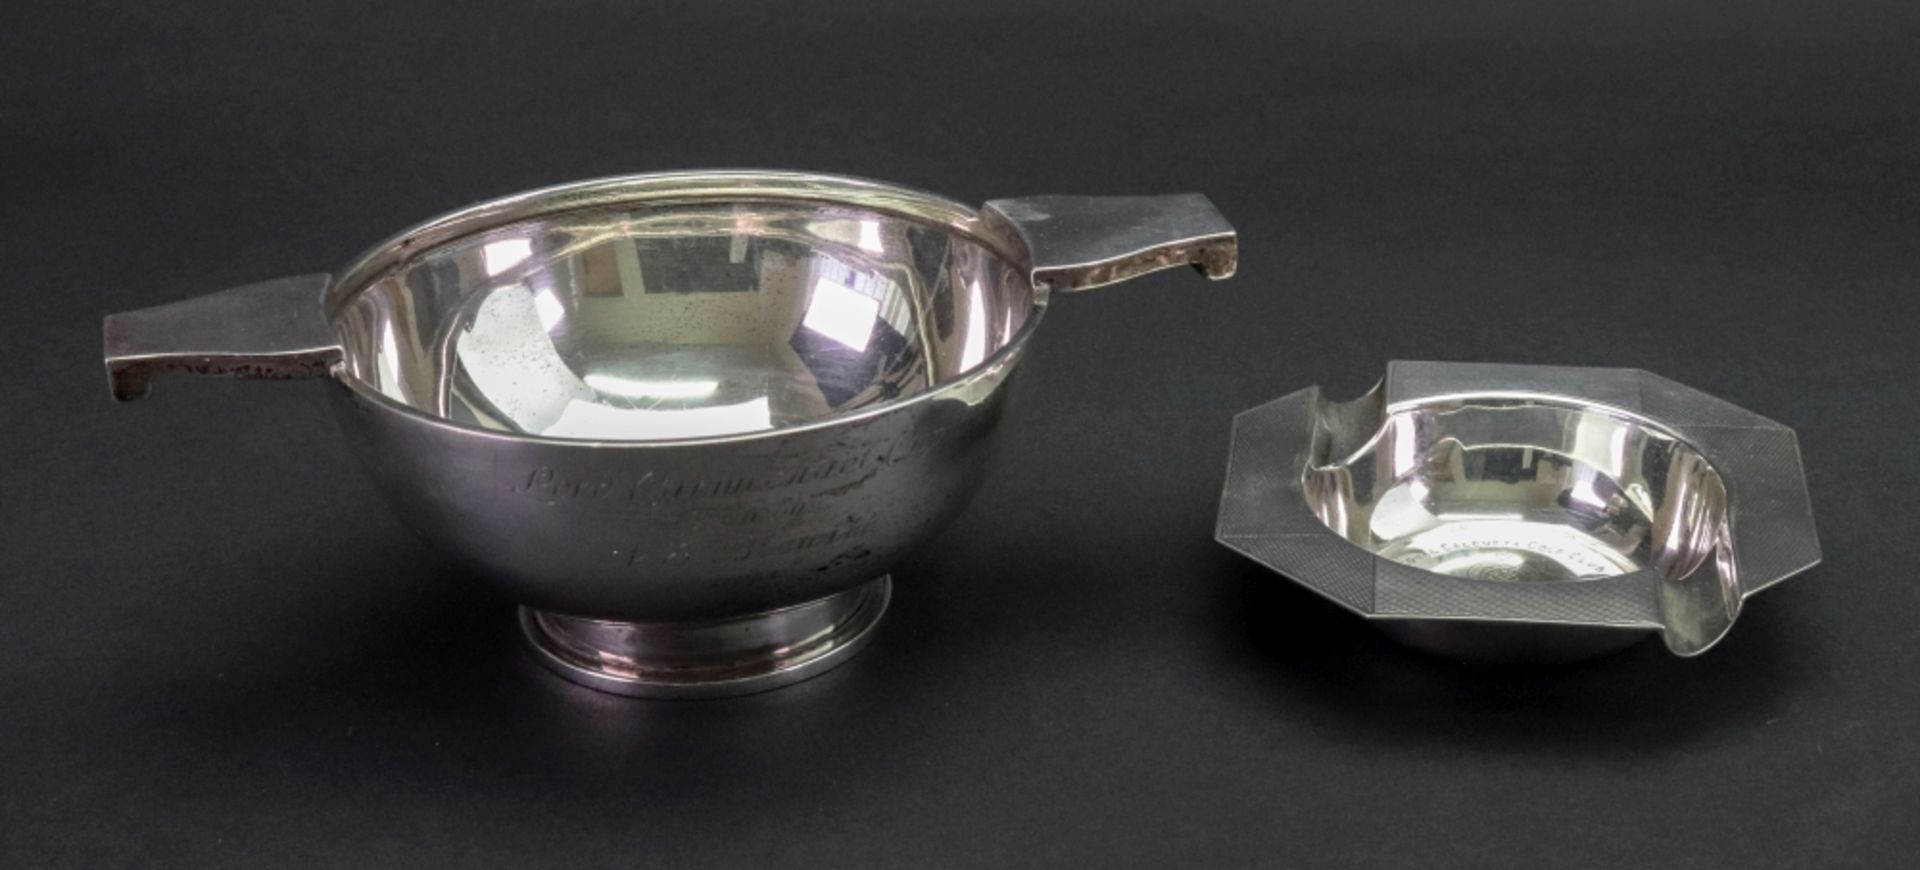 An Indian silver Quaich, inscribed 'Lord Carmichael Cup won by A.